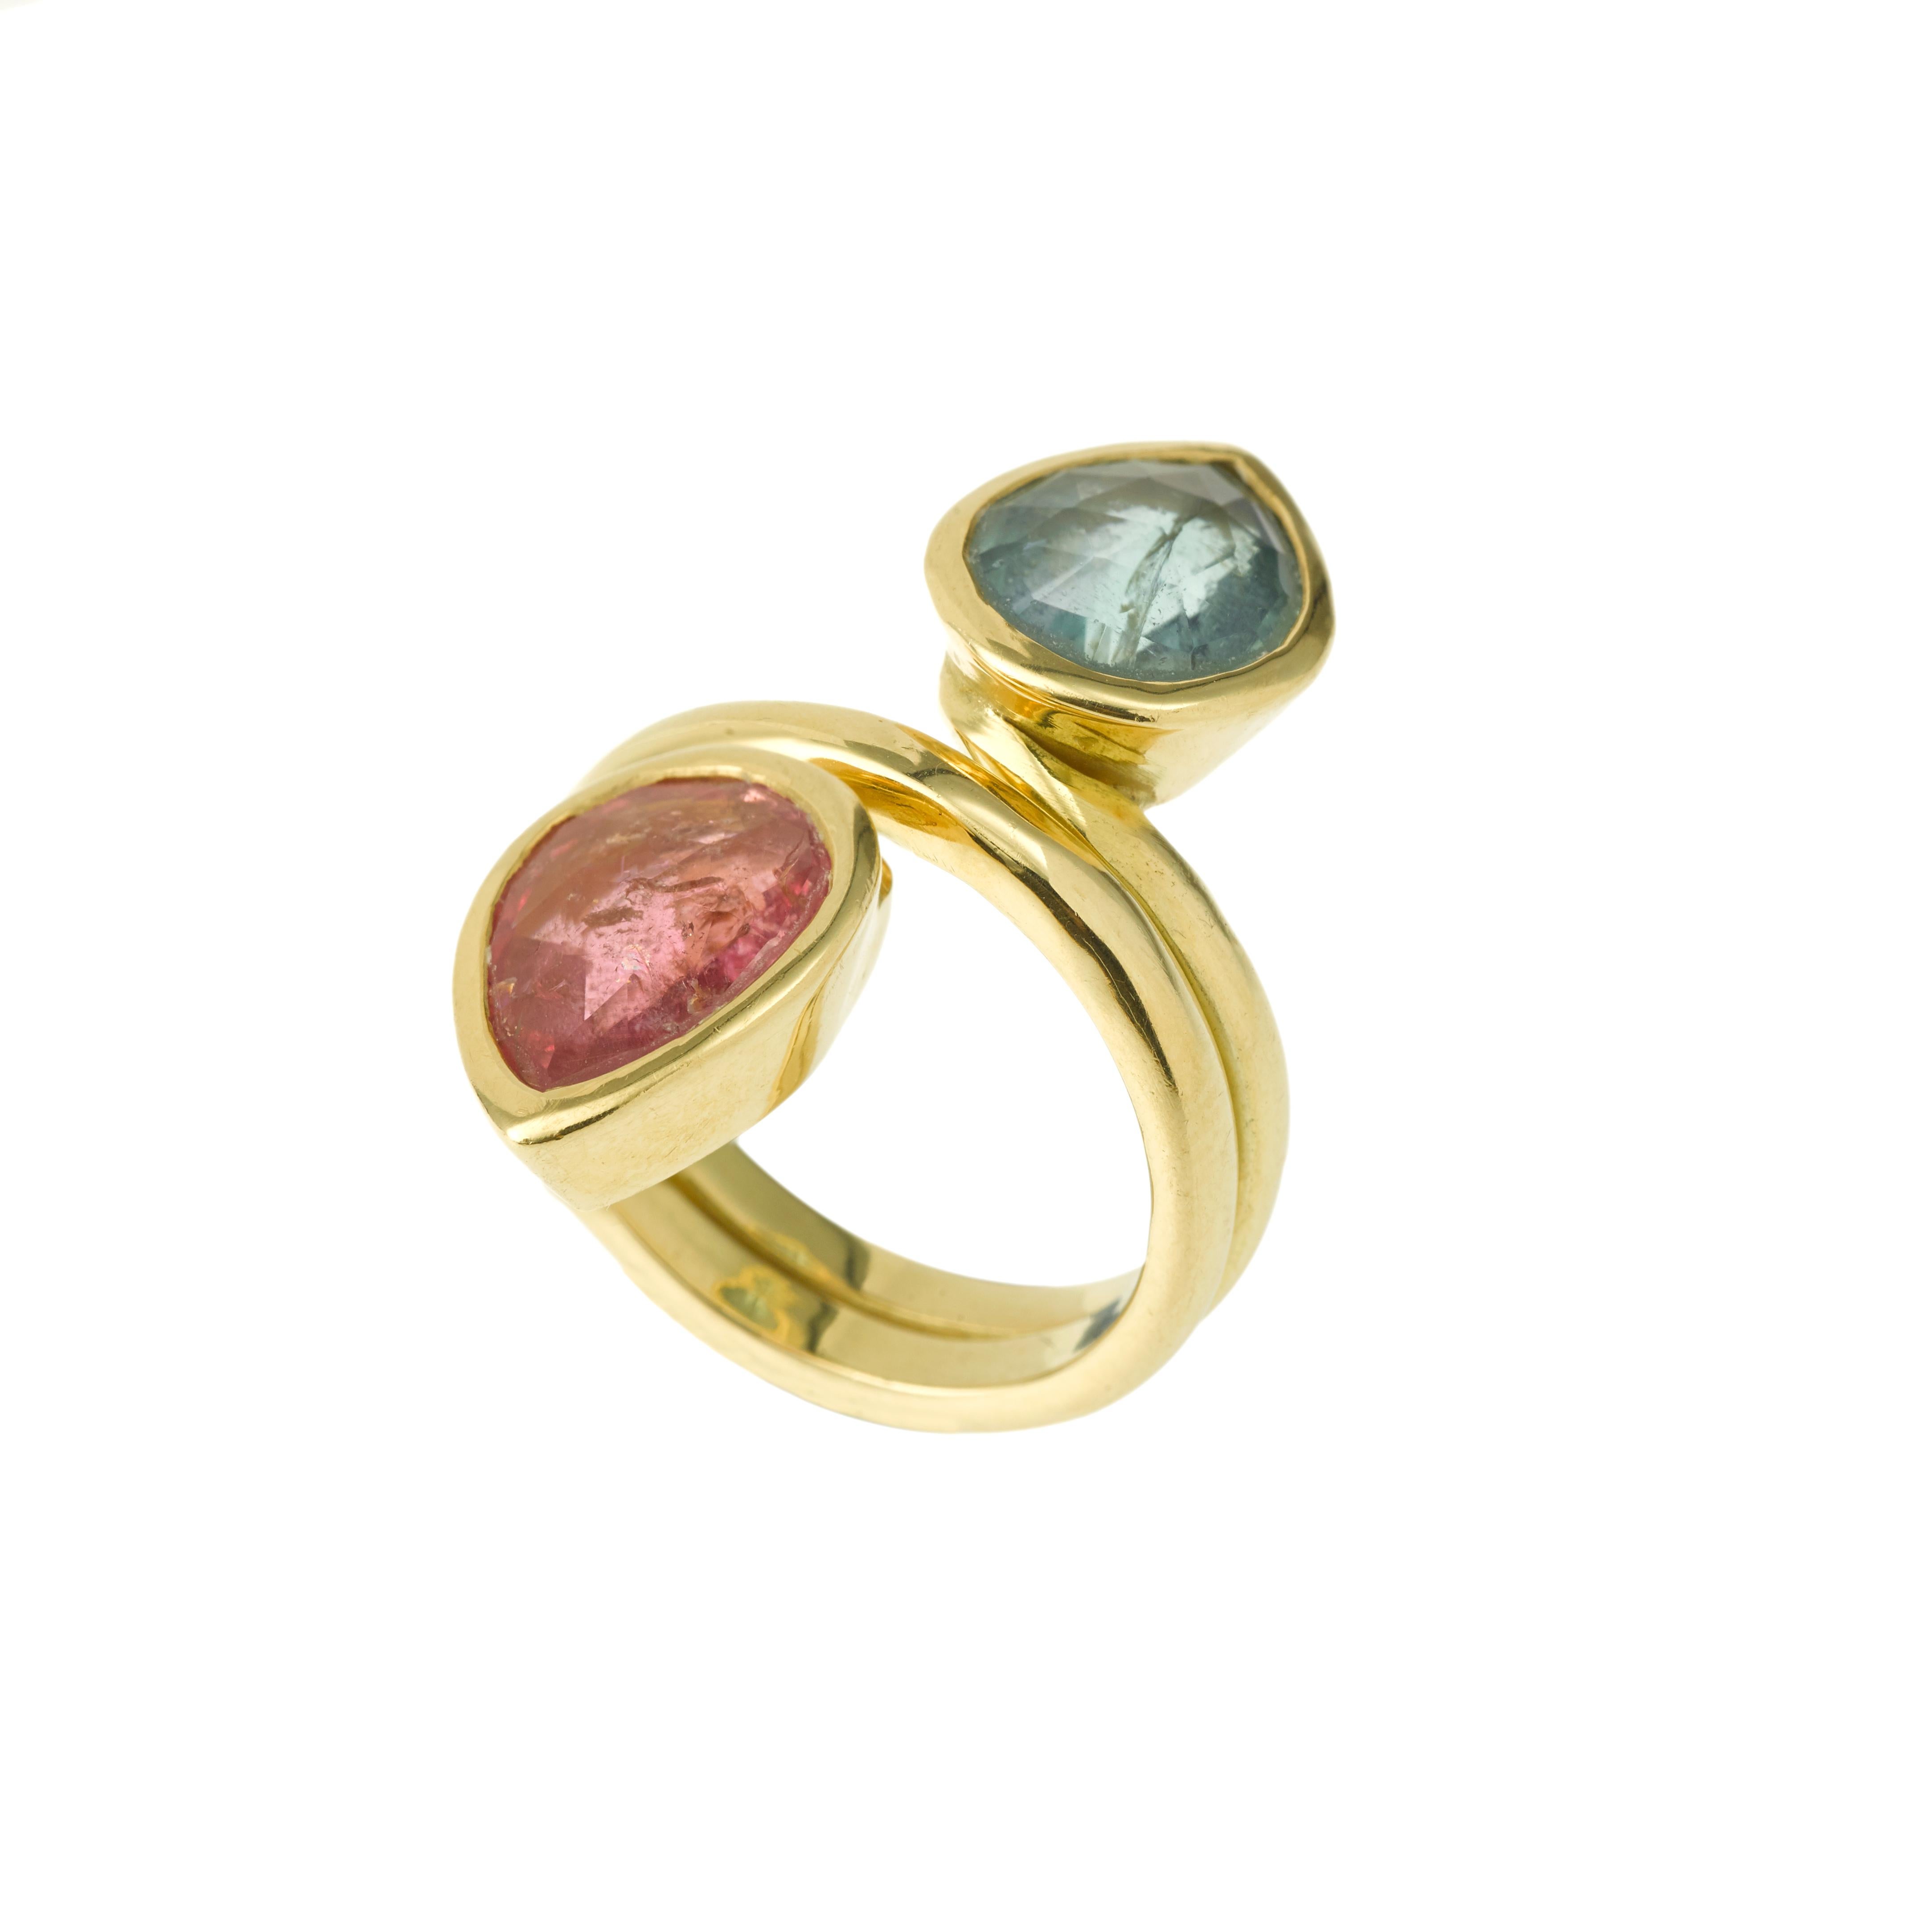 An important Pear Shaped Pink and Green Tourmaline Toi et Moi Ring.

18K yellow gold, 750 / 1000eme

Weight of pink Tourmaline 3.60 carats
Dimensions: 14 X 10.2 mm

Weight of green Tourmaline 4.14 carats
Dimensions: 14 X 11 mm

One of a kind Ring !